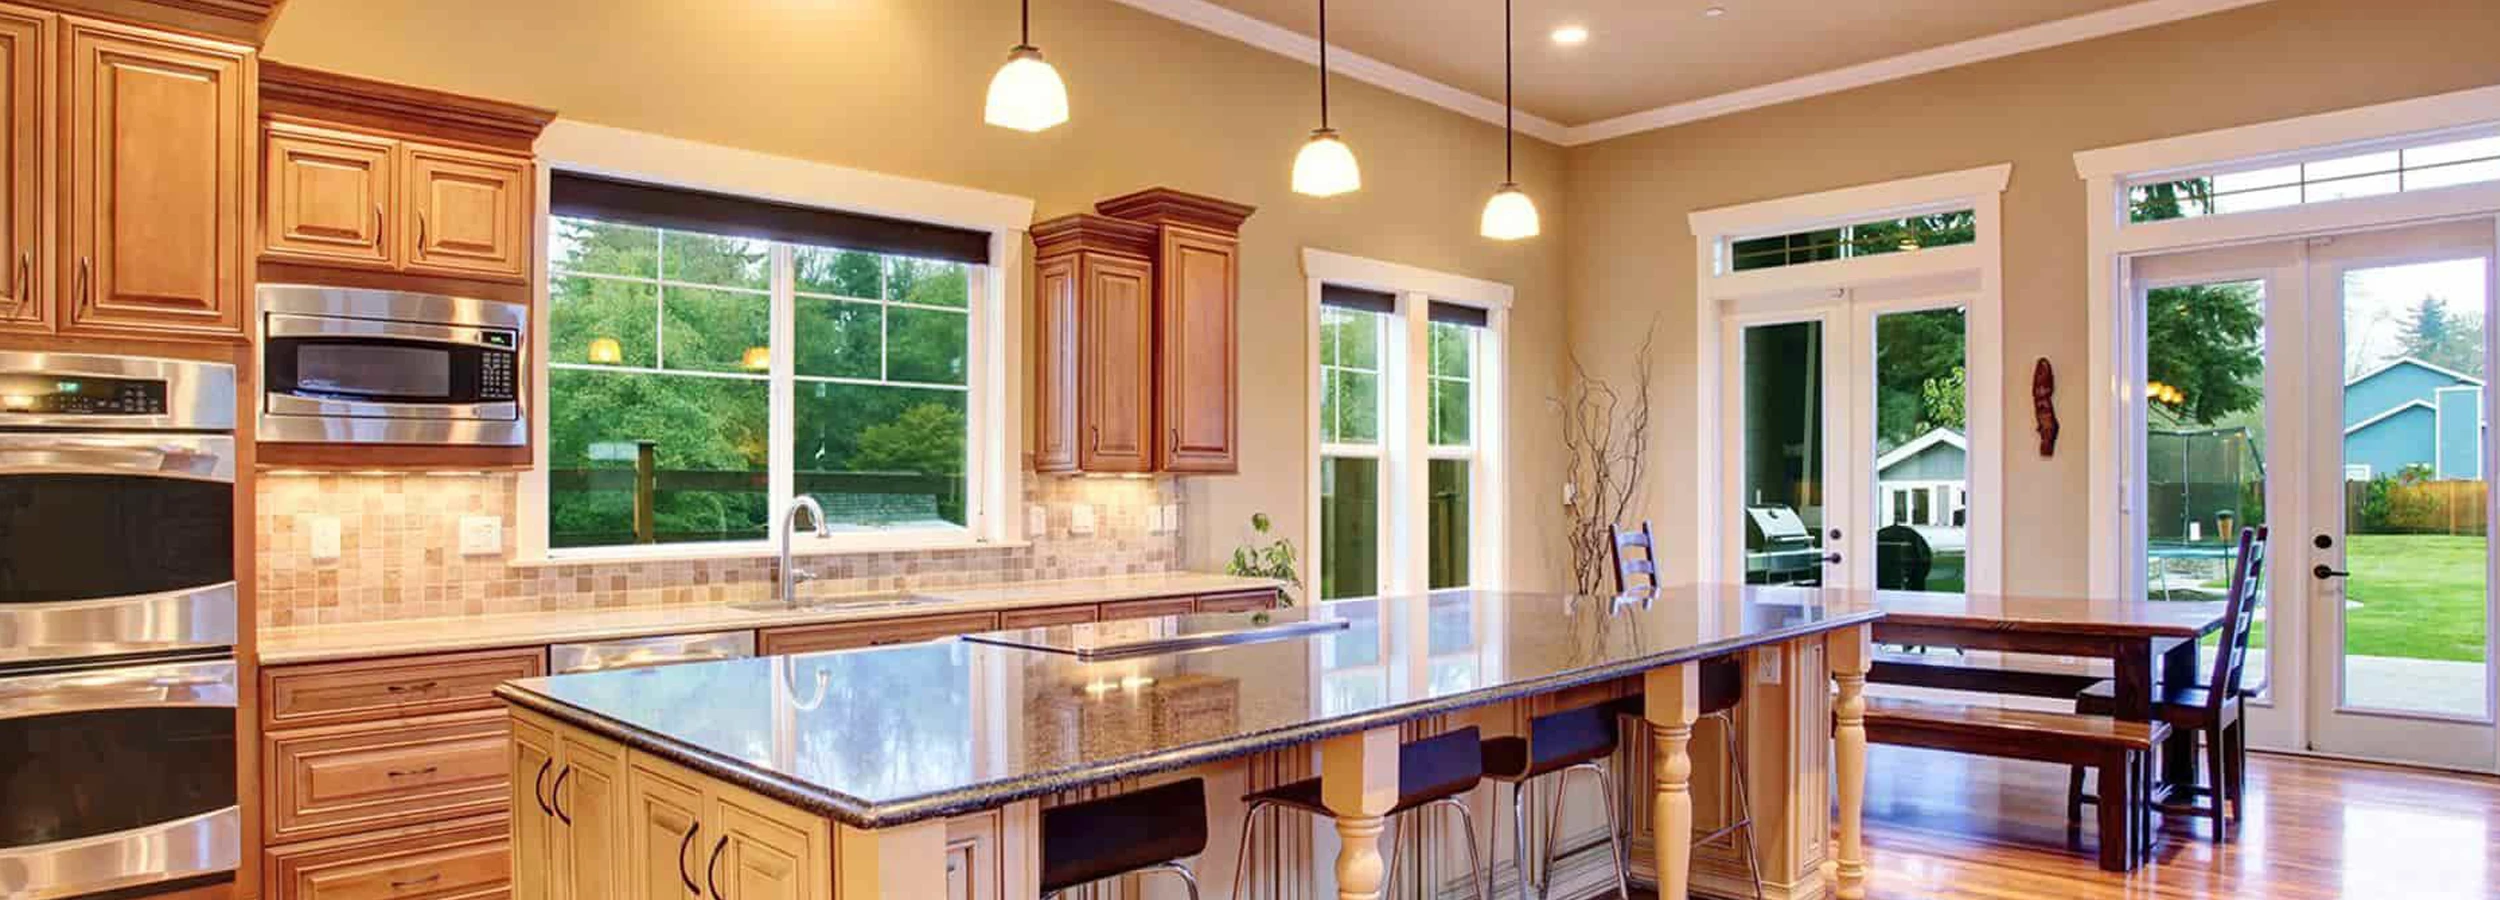 Kitchen island with brown dining room table and large windows.